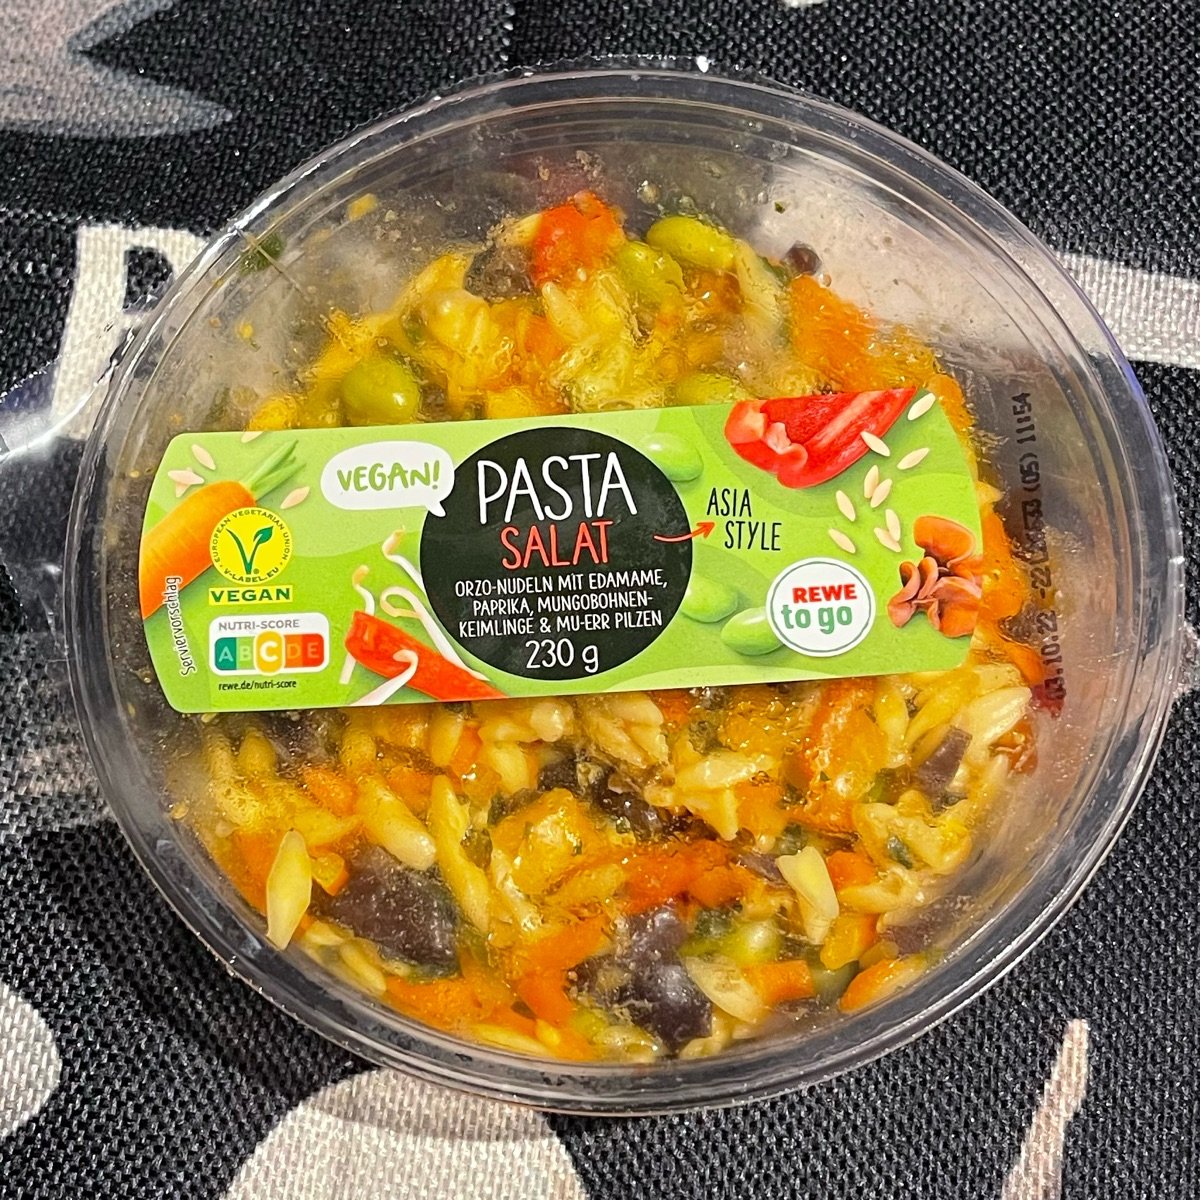 To Pastasalat Go abillion | Review Asia-Style Rewe